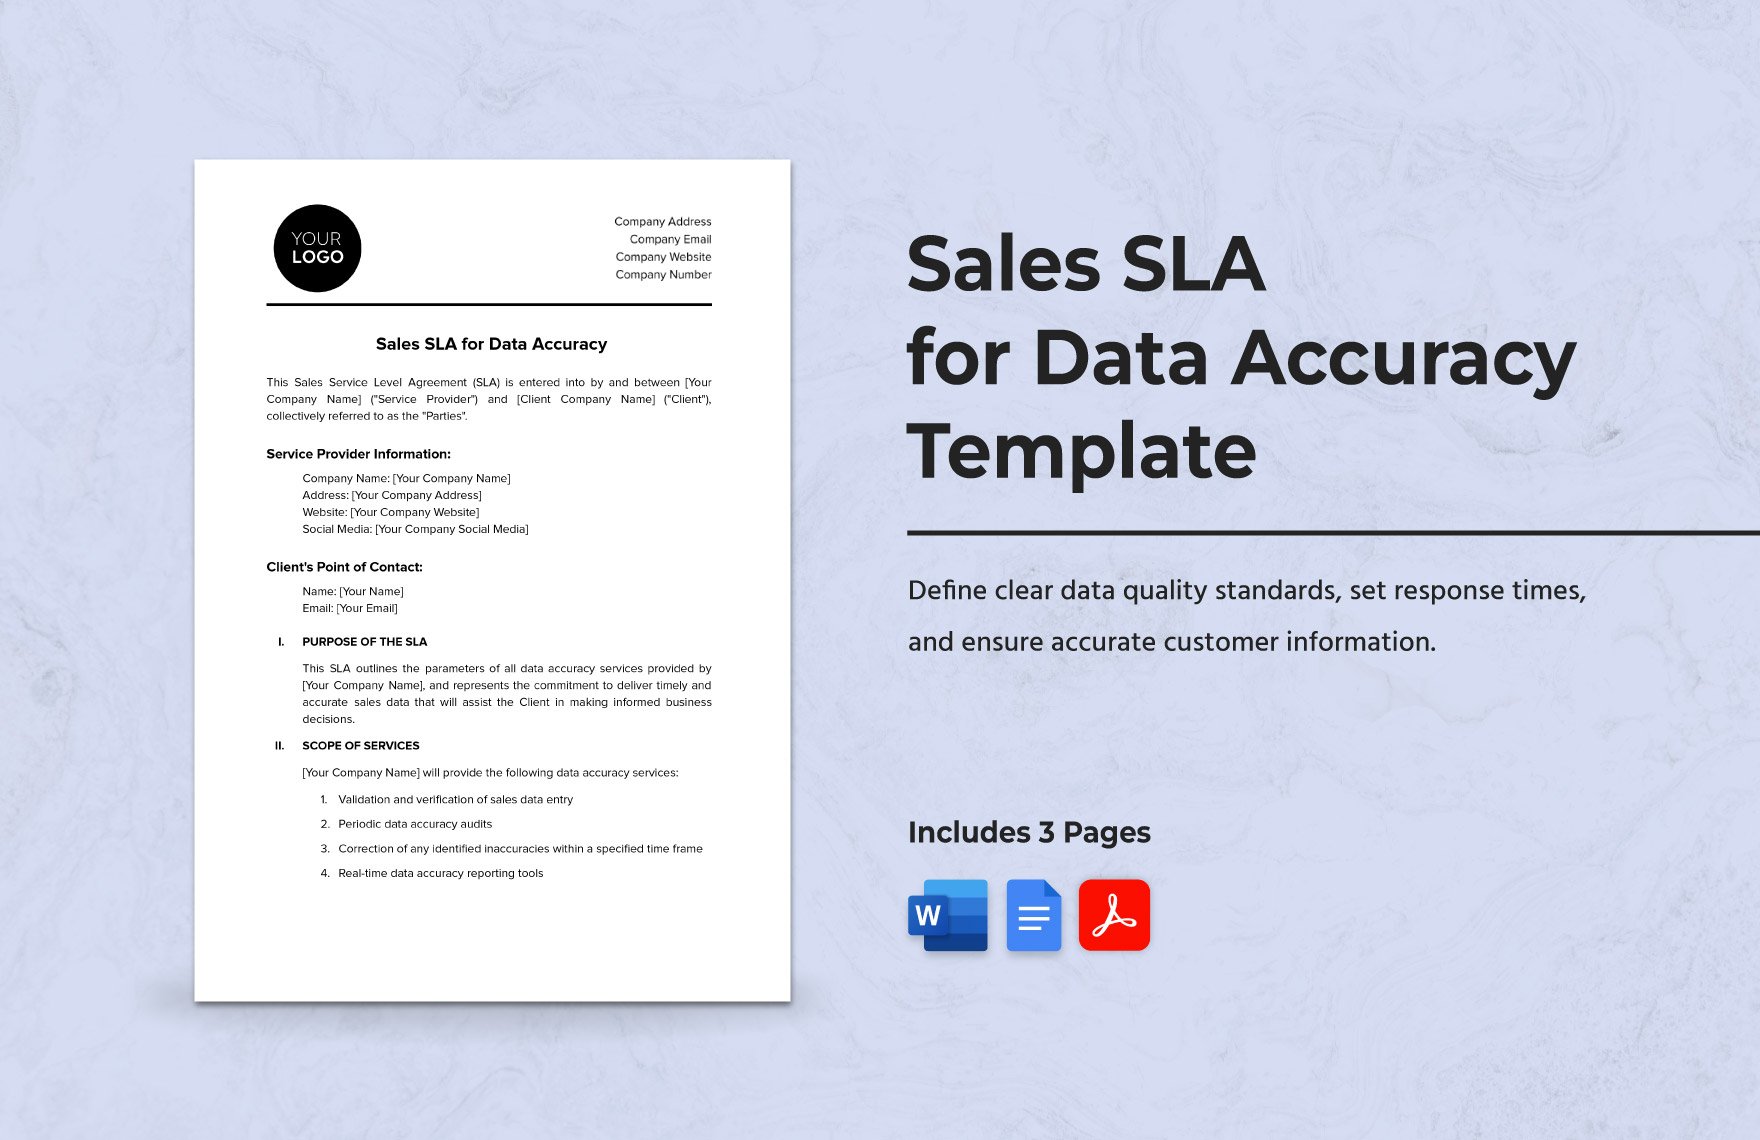 Sales SLA for Data Accuracy Template